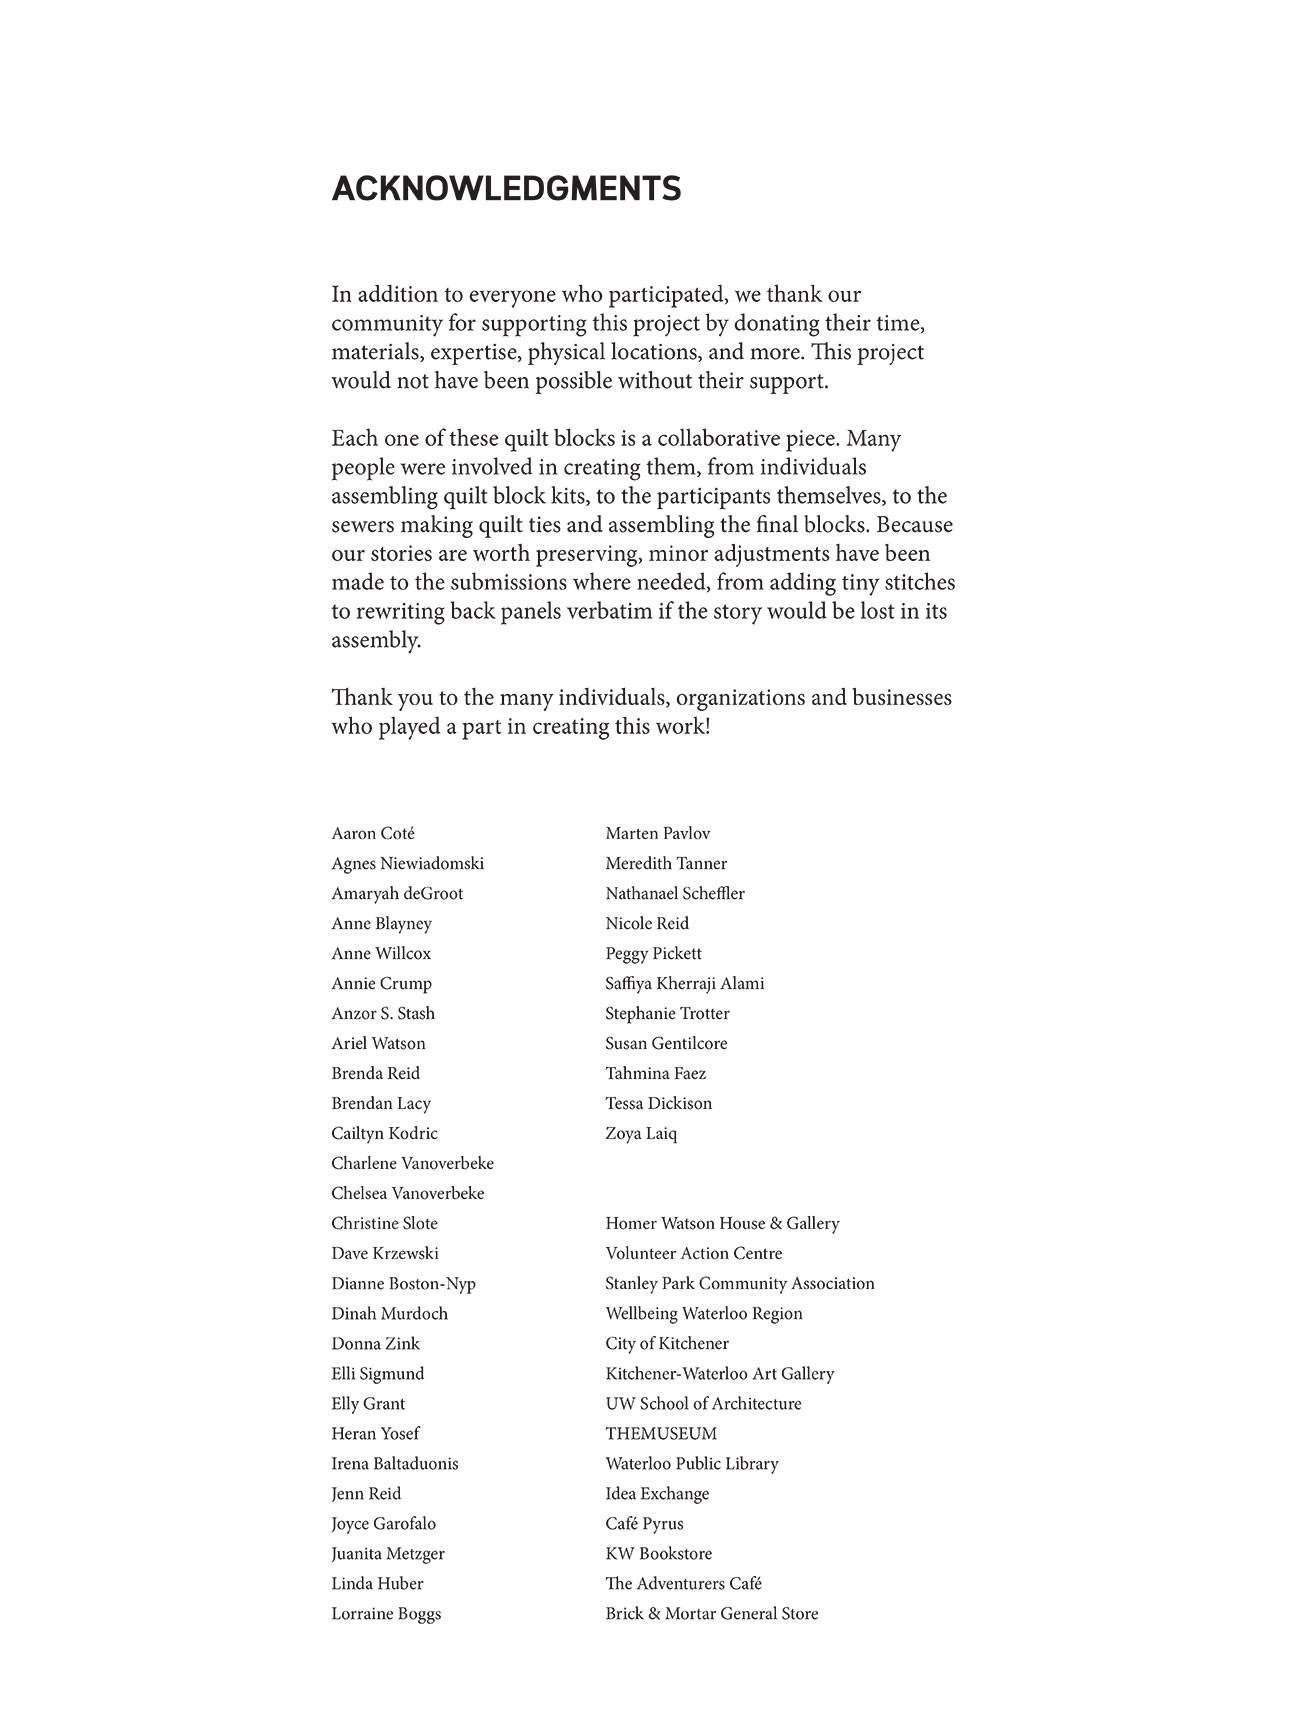 From Behind the Mask Exhibition - Acknowledgments